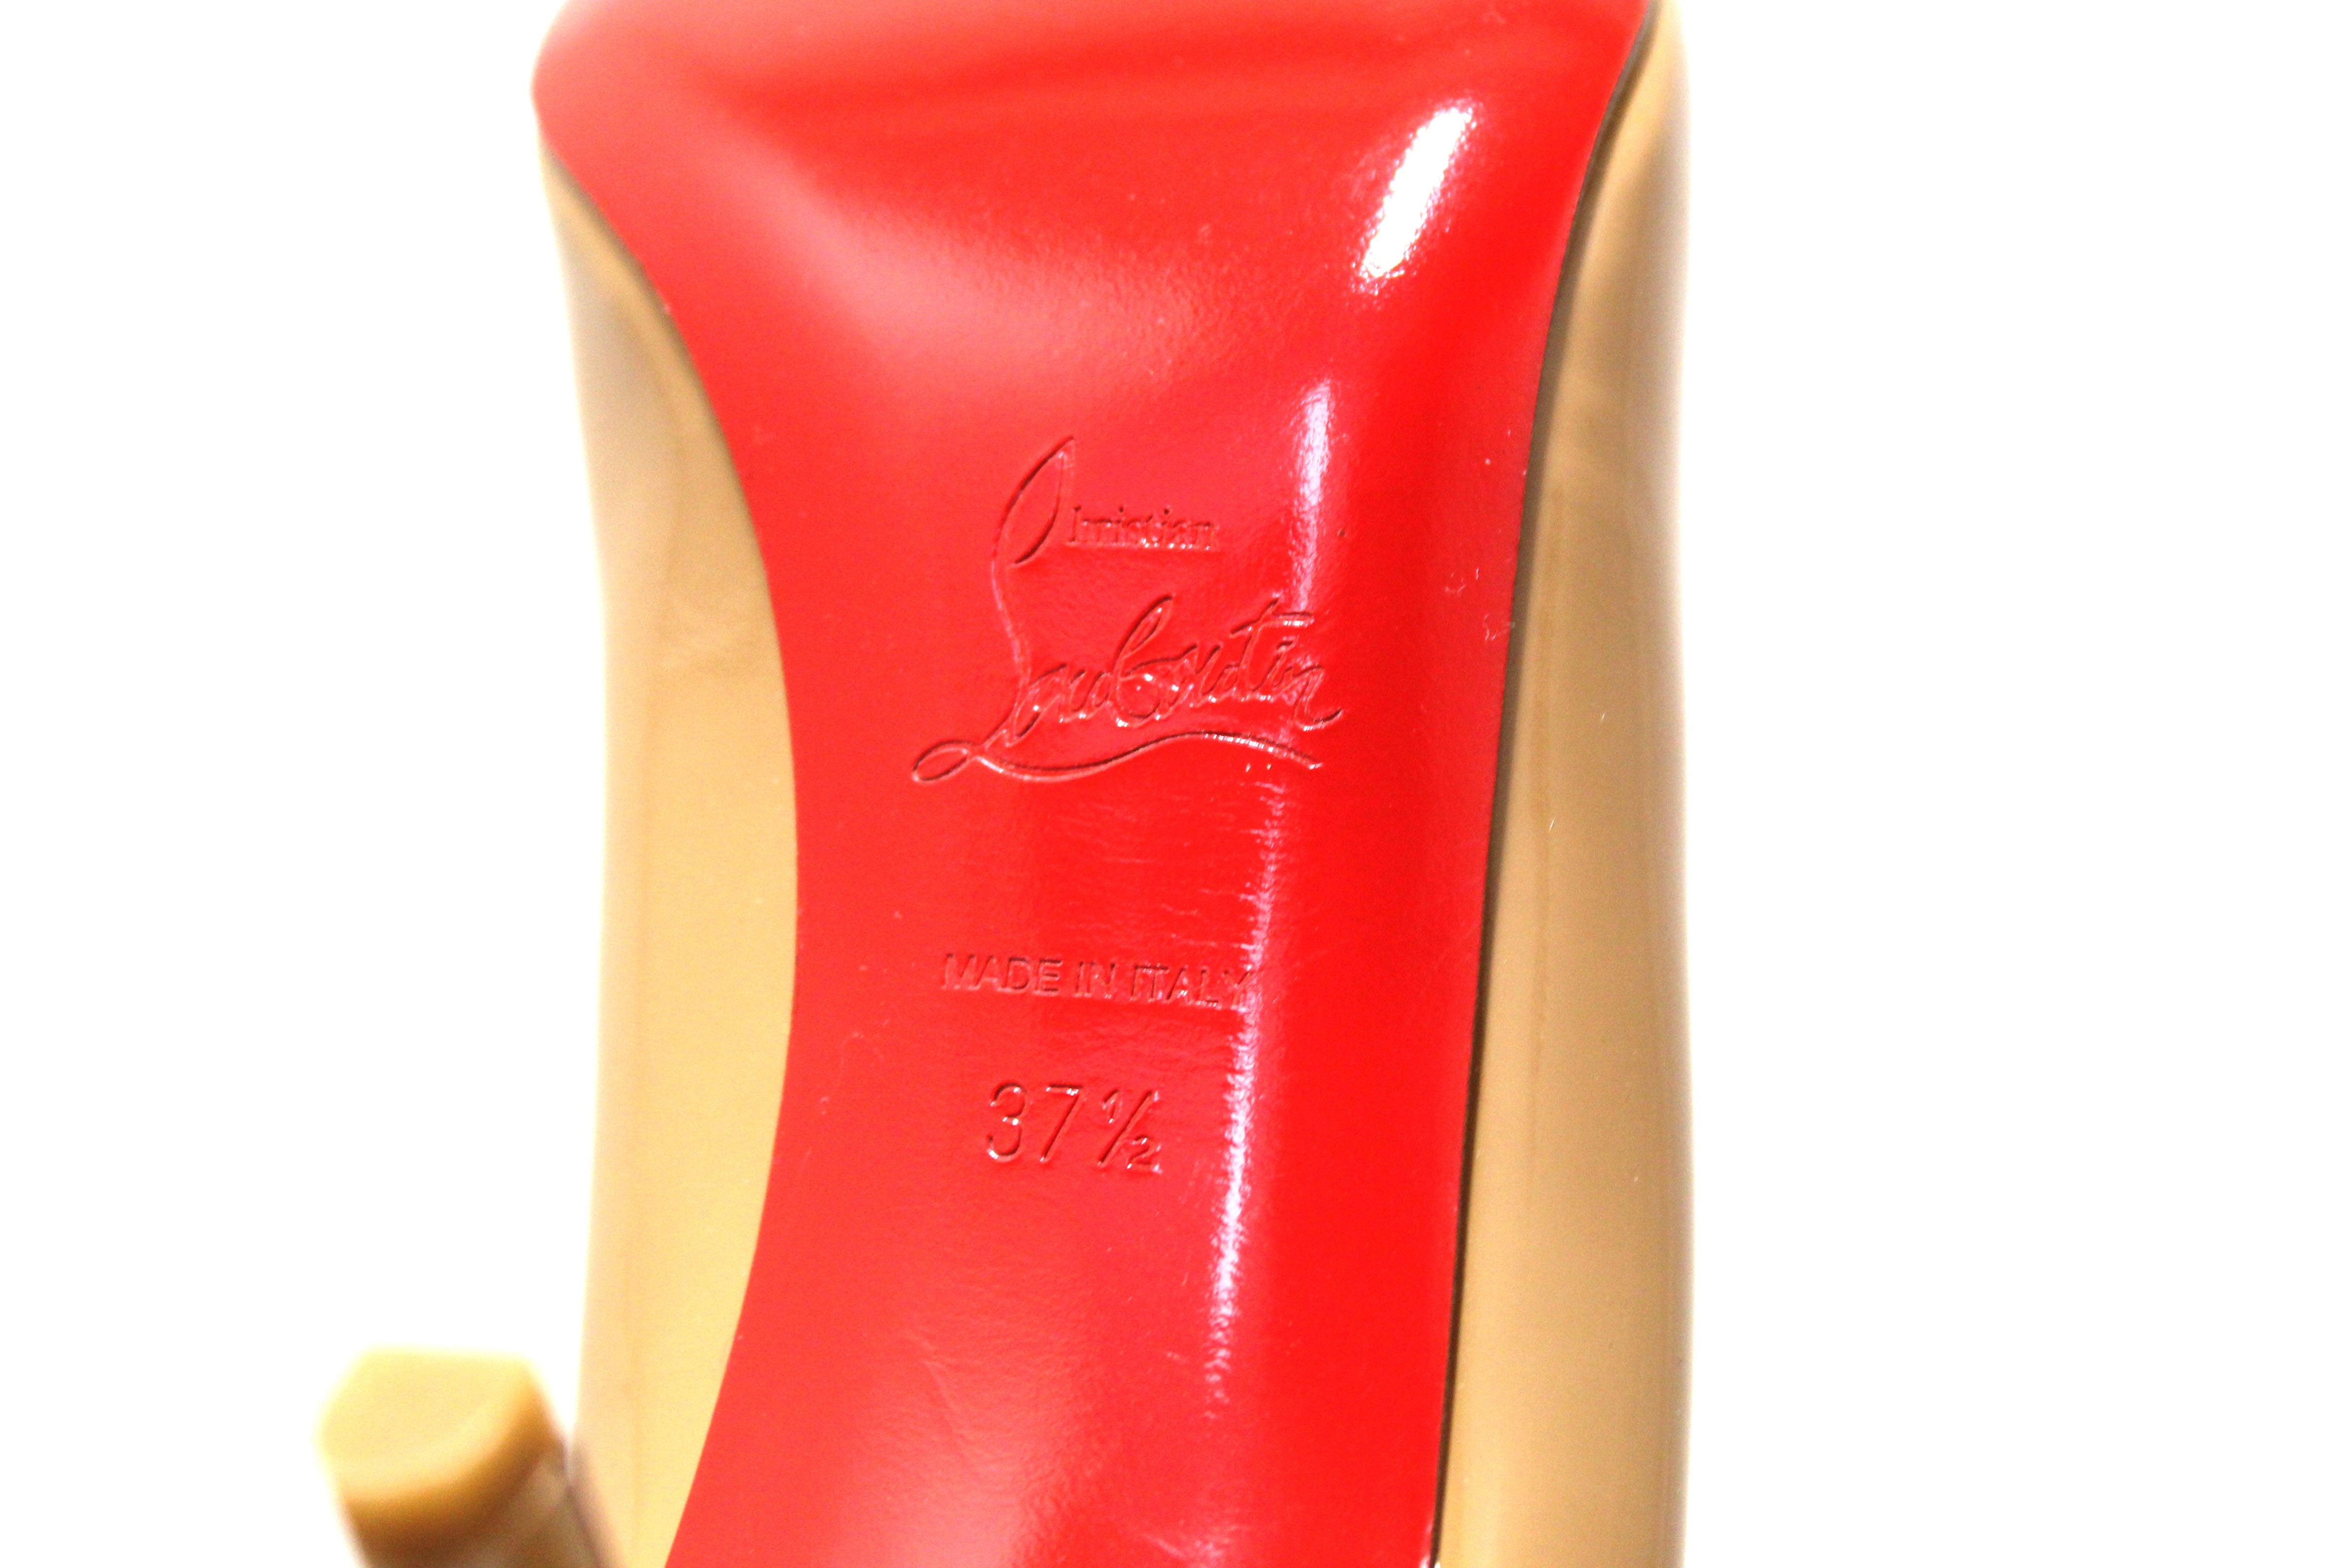 NEW Authentic Christian Louboutin Camel Patent Leather Pigalle Follies 70mm Pumps Size 37.5